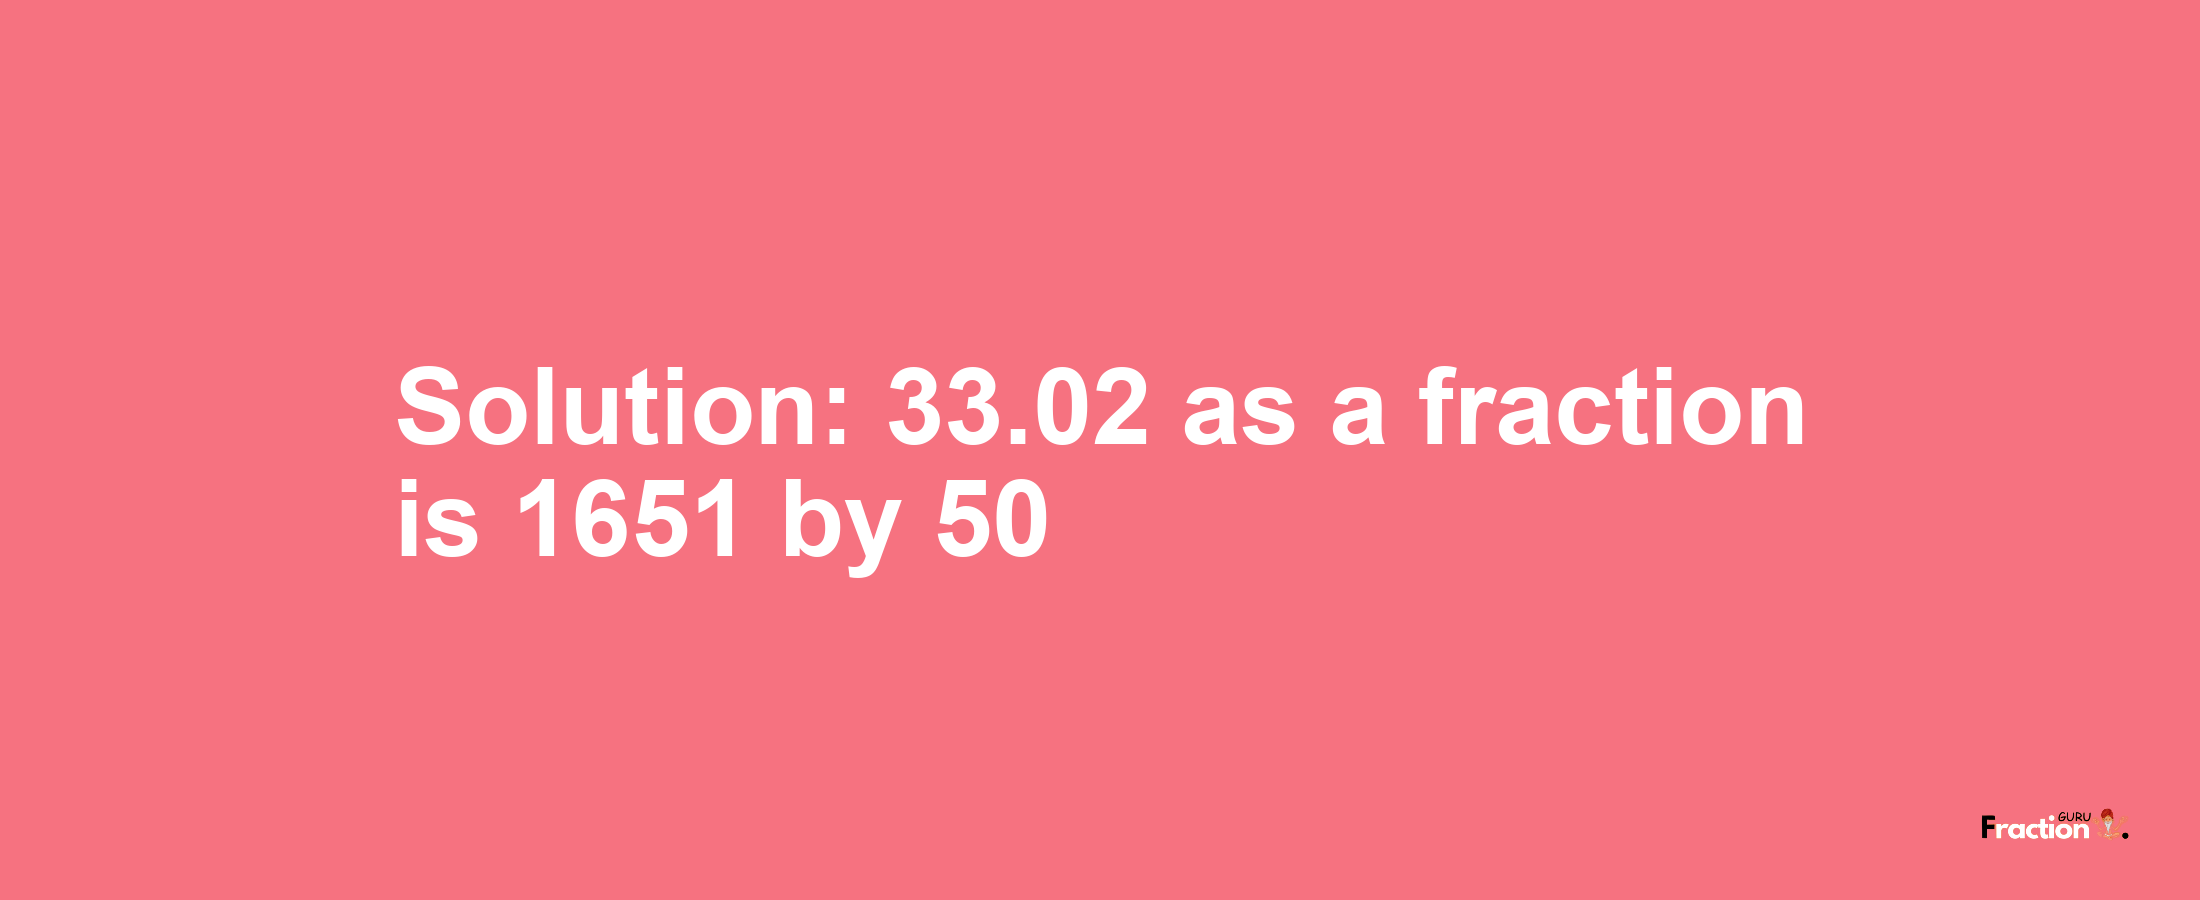 Solution:33.02 as a fraction is 1651/50